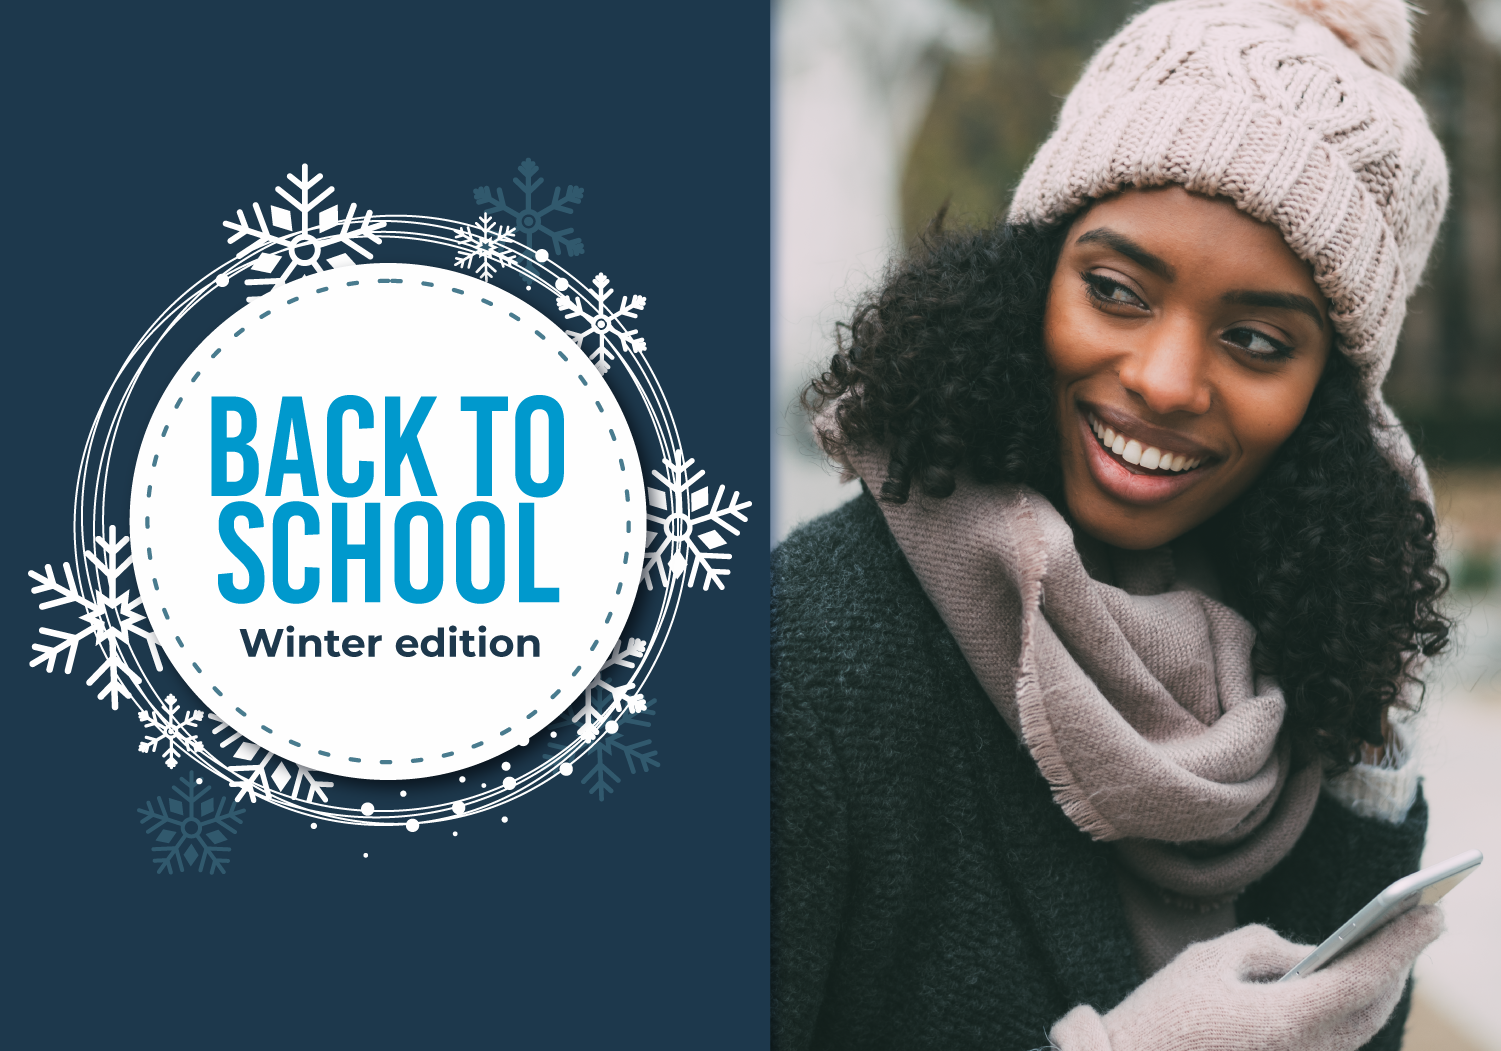 5 Back to School Tips for Students When Riding in the Cold